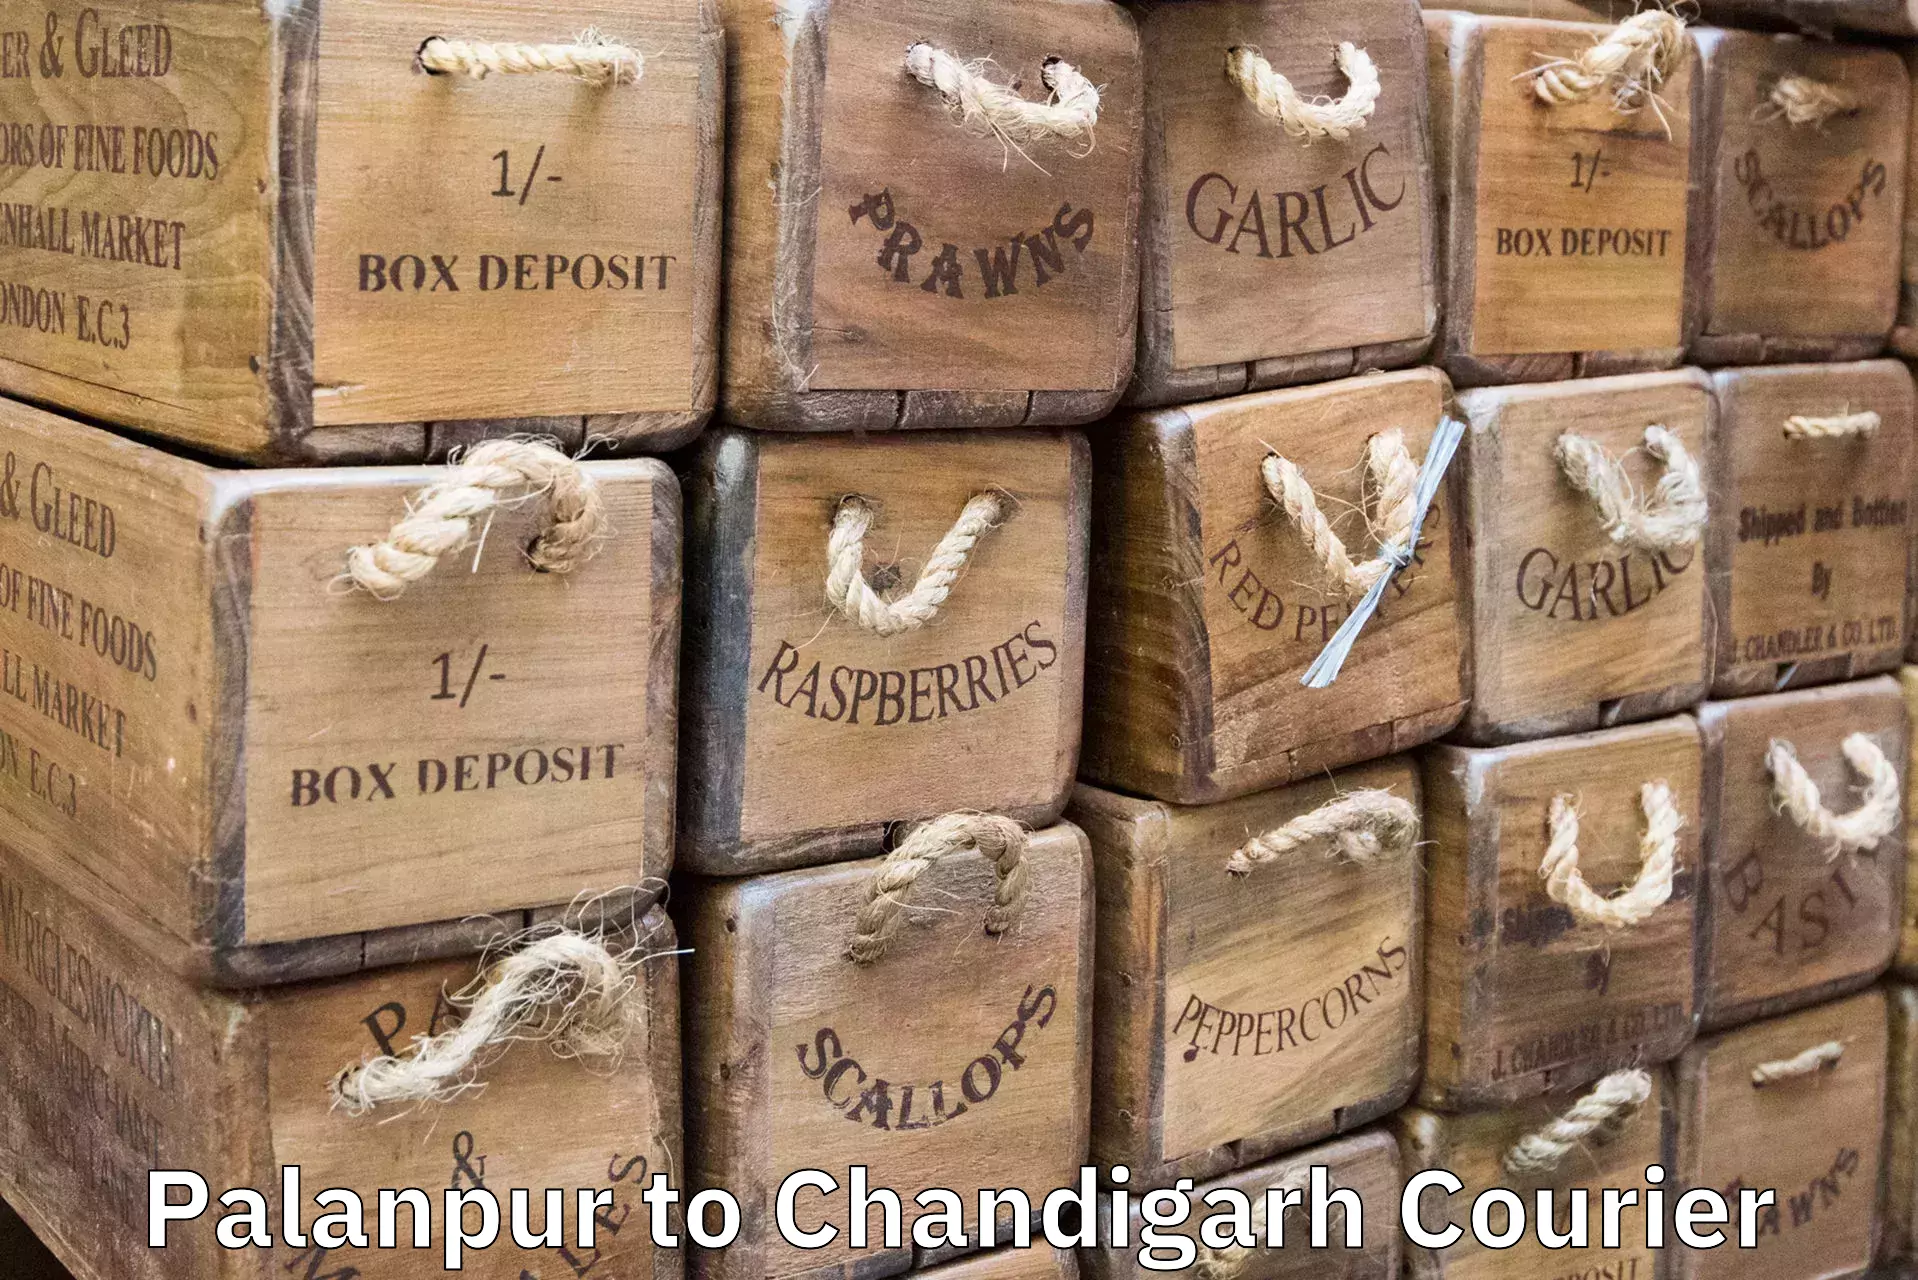 Luggage shipment specialists Palanpur to Chandigarh